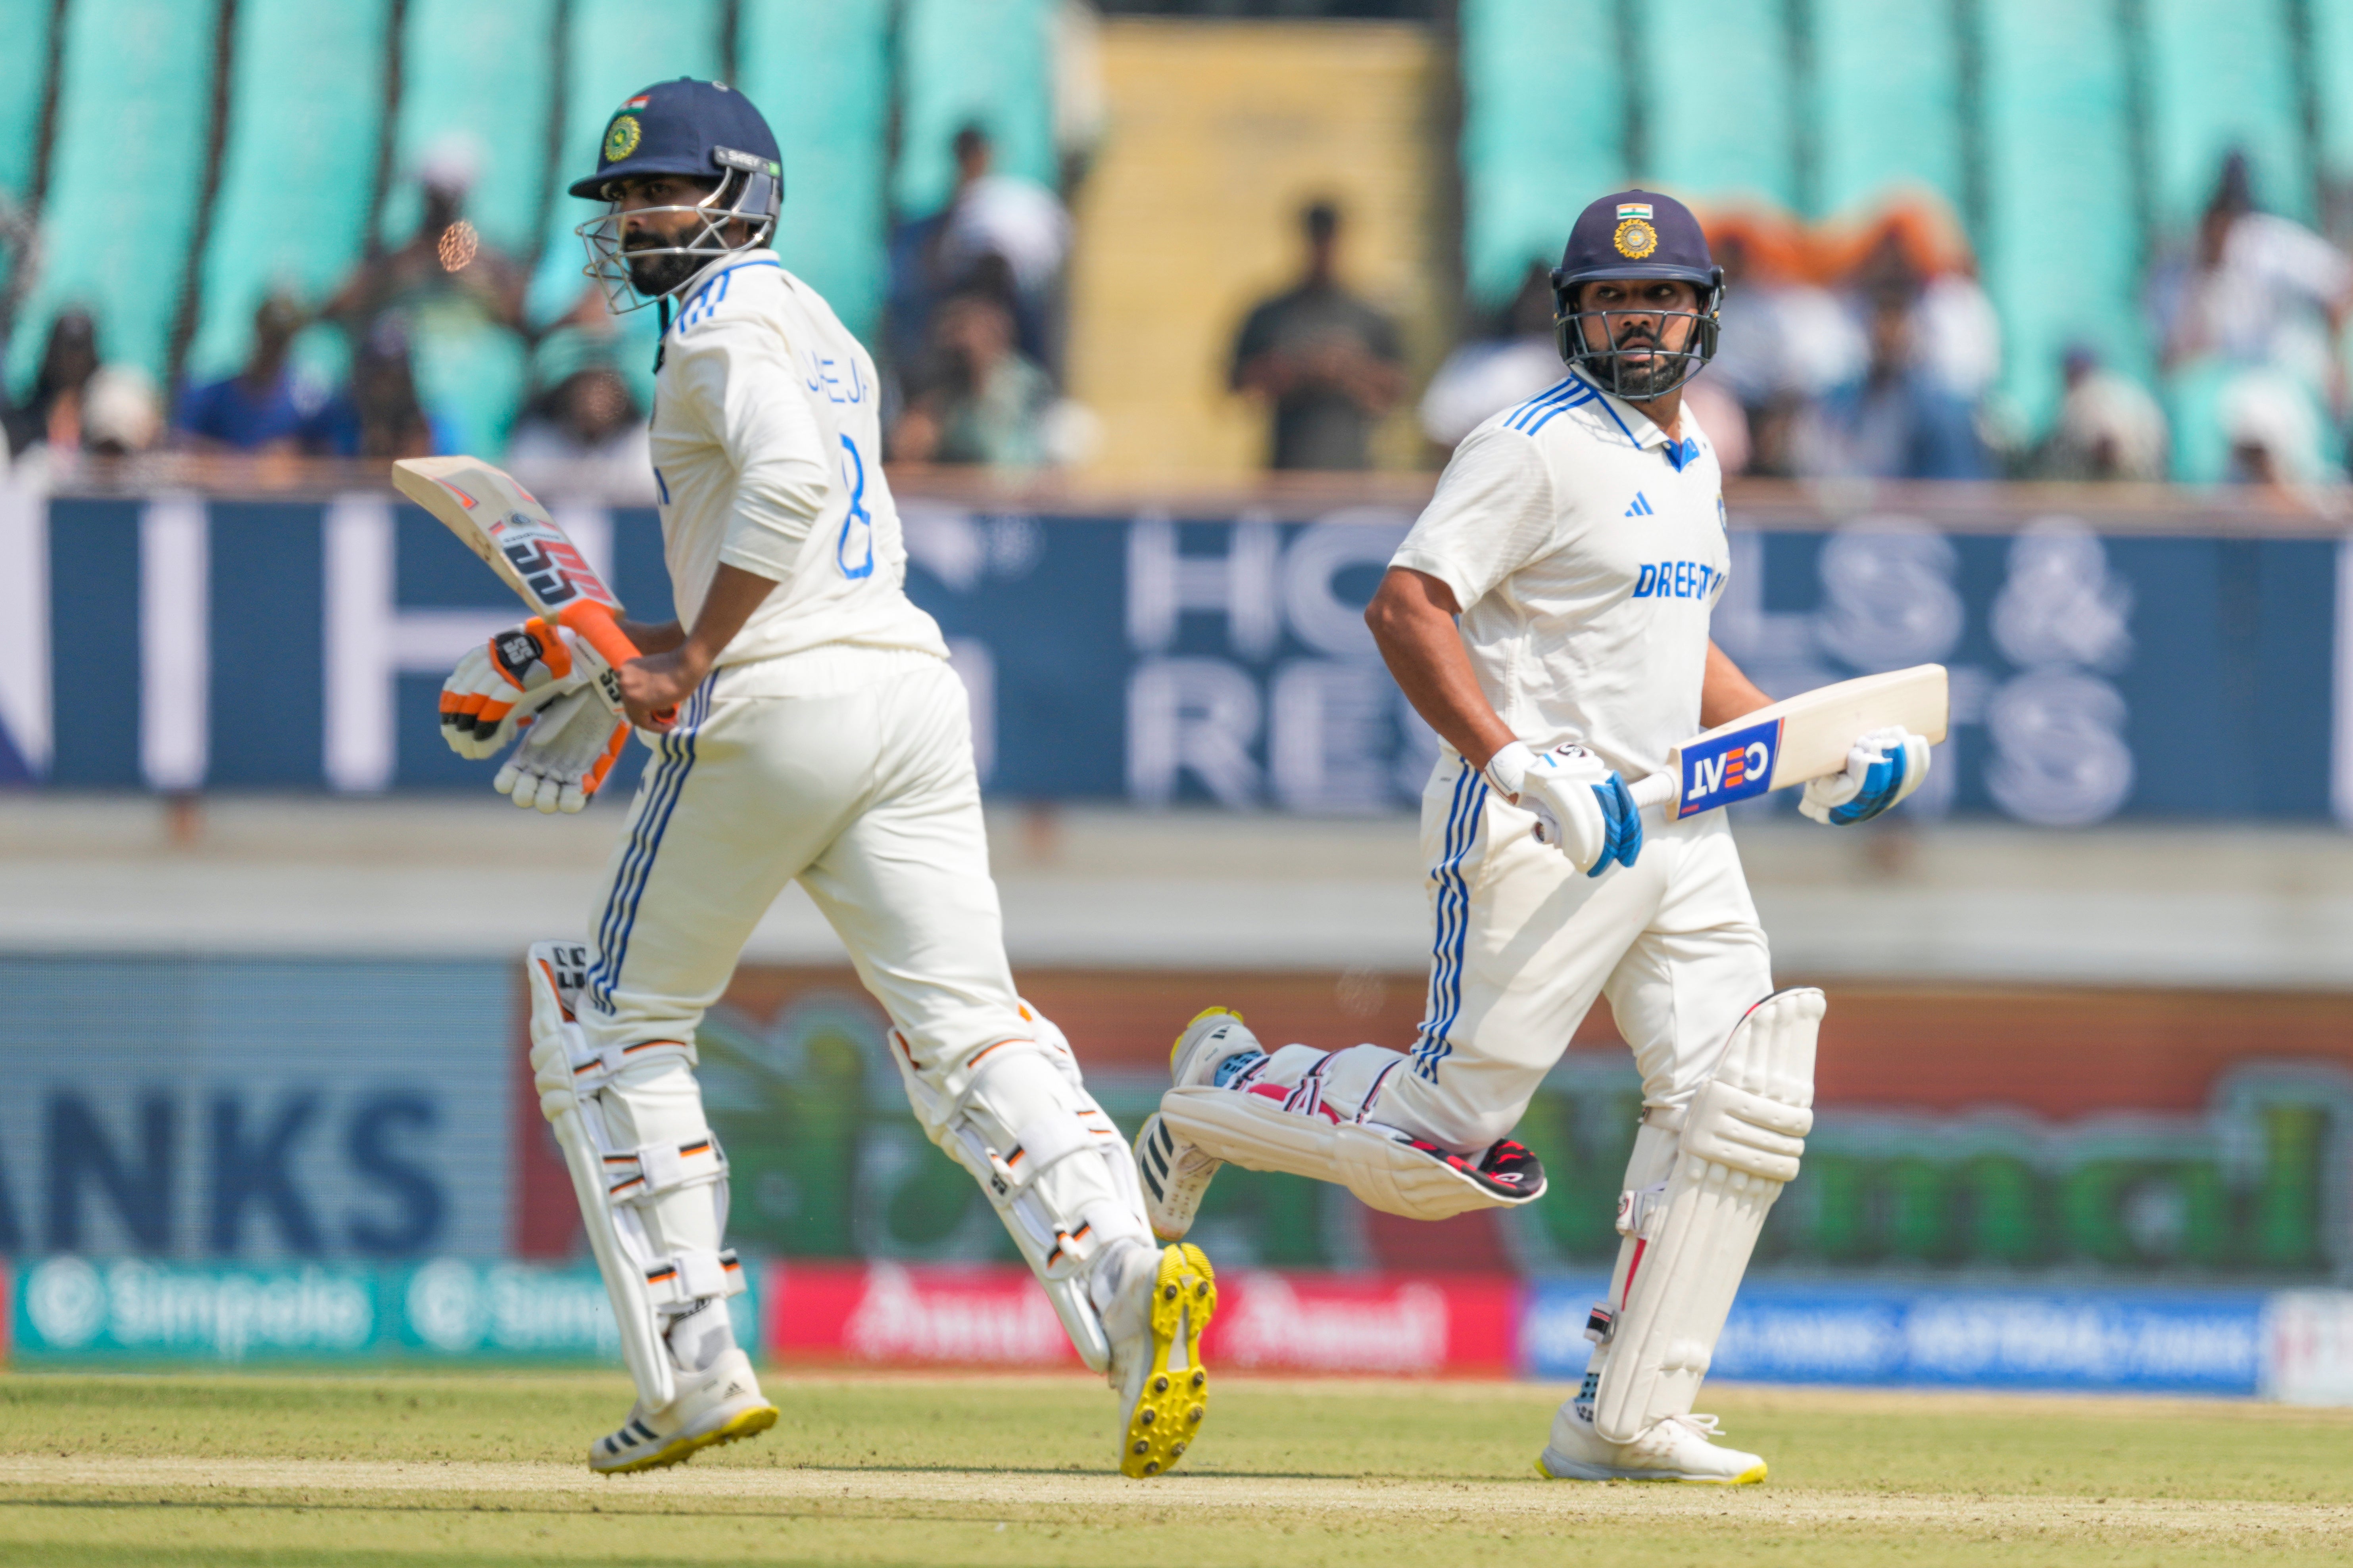 England got off to a promising start before Jadeja and Rohit dug in